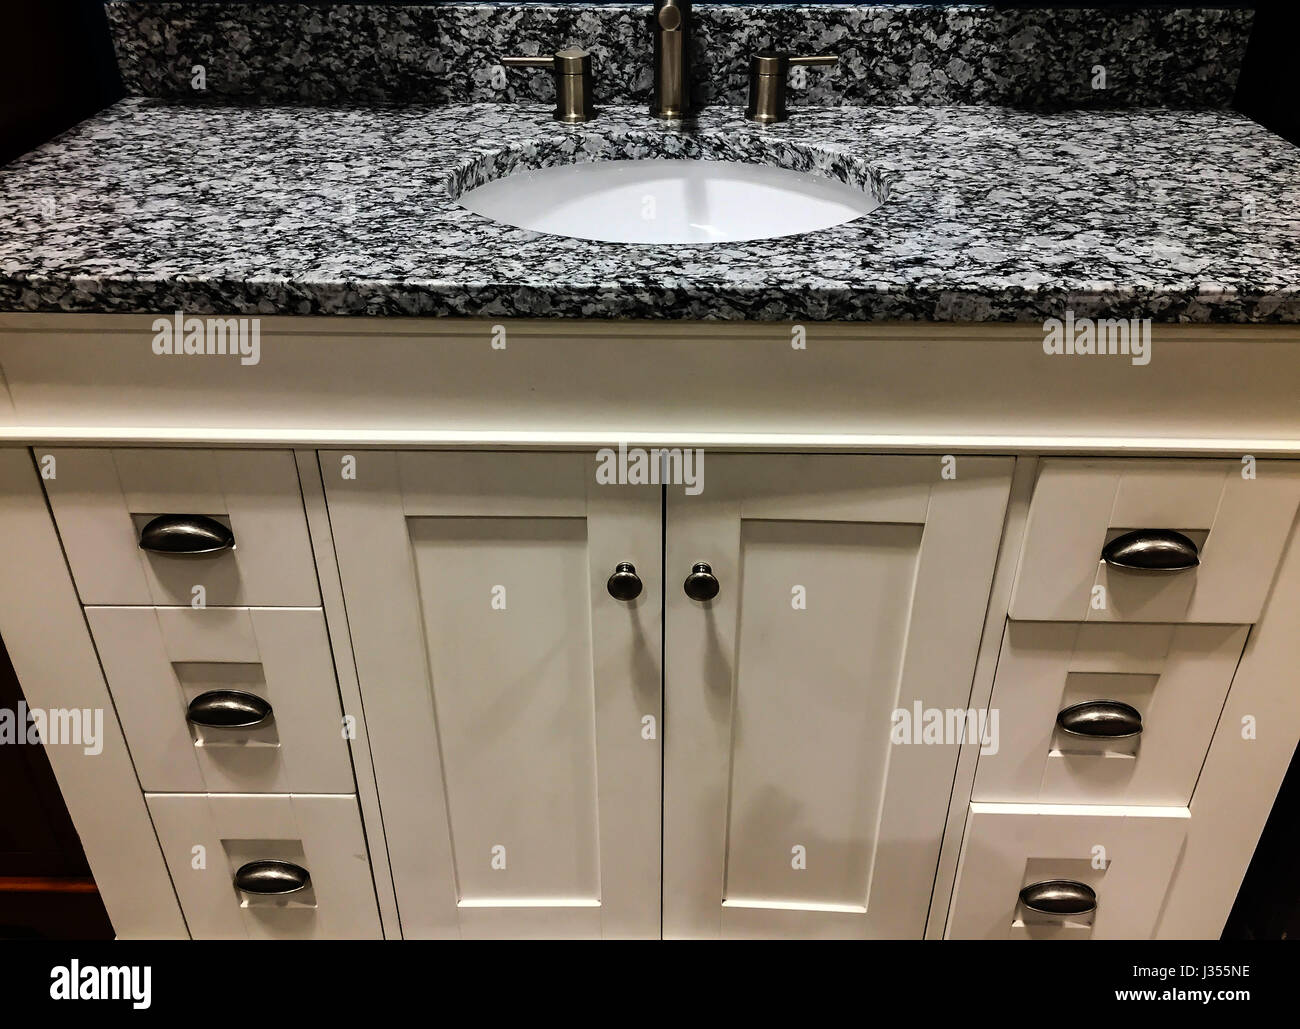 Bathroom Granite Or Marble Counter Tops And Backsplash With Sinks And Stock Photo Alamy,What Temp To Cook Chicken Breast